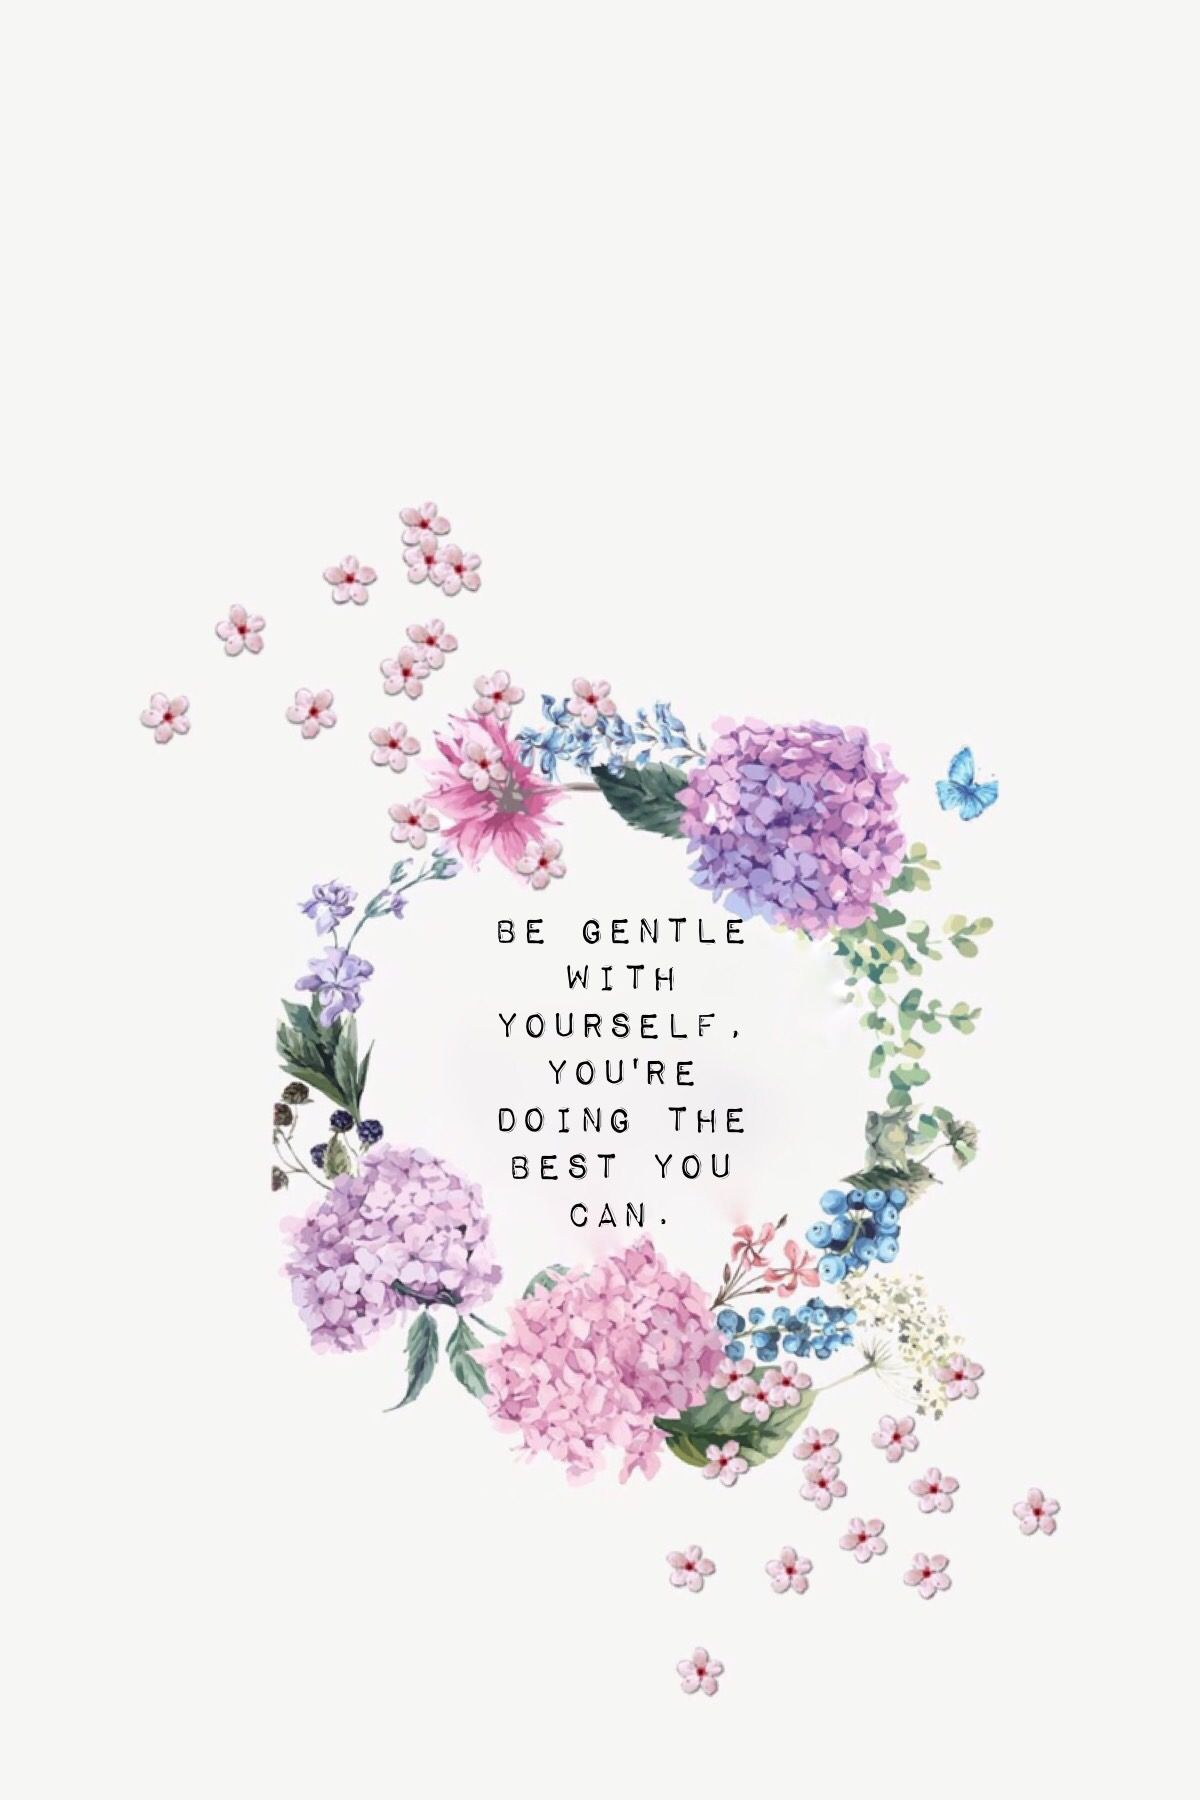 Love yourself, selflove, seltesteem, recovery wallpaper, iPhone